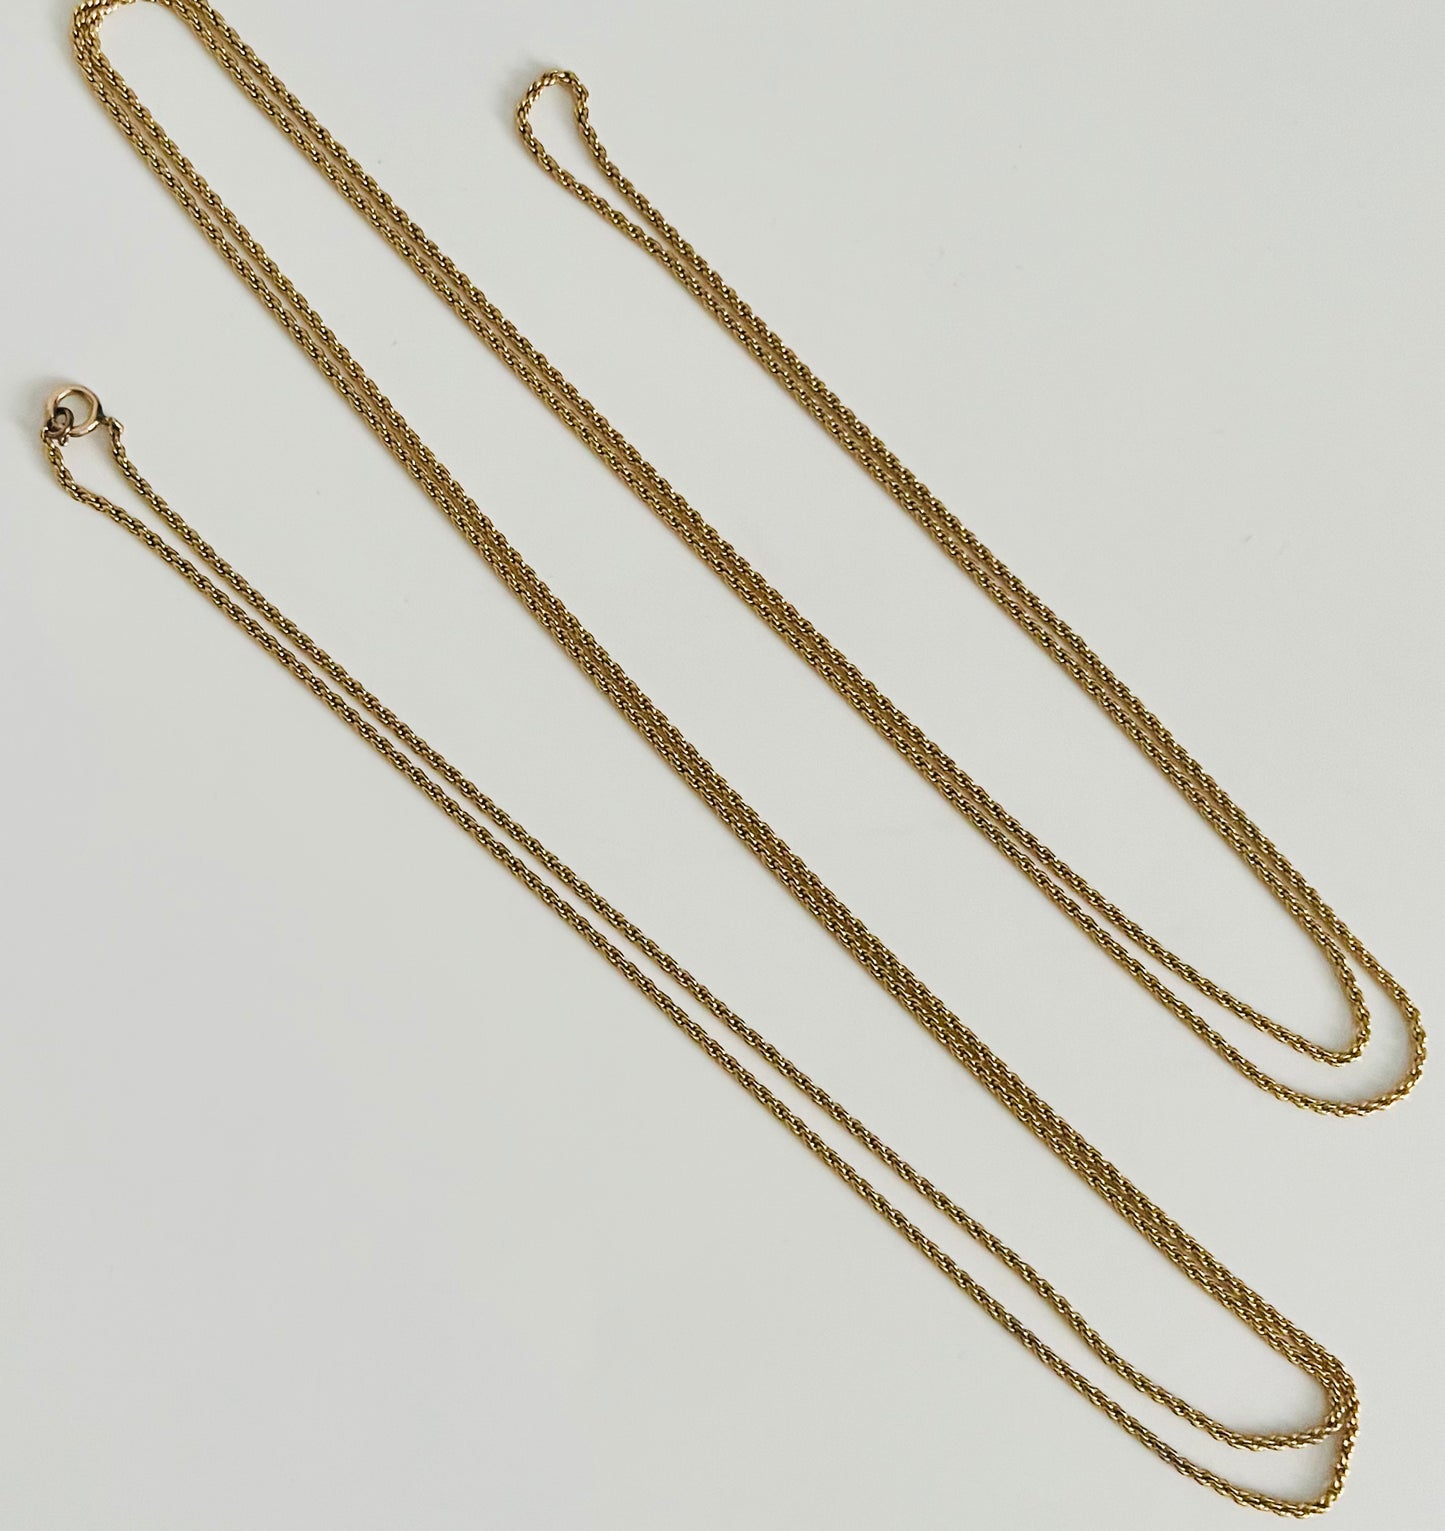 Vintage Very Long 14k Gold Filled Dainty Chain